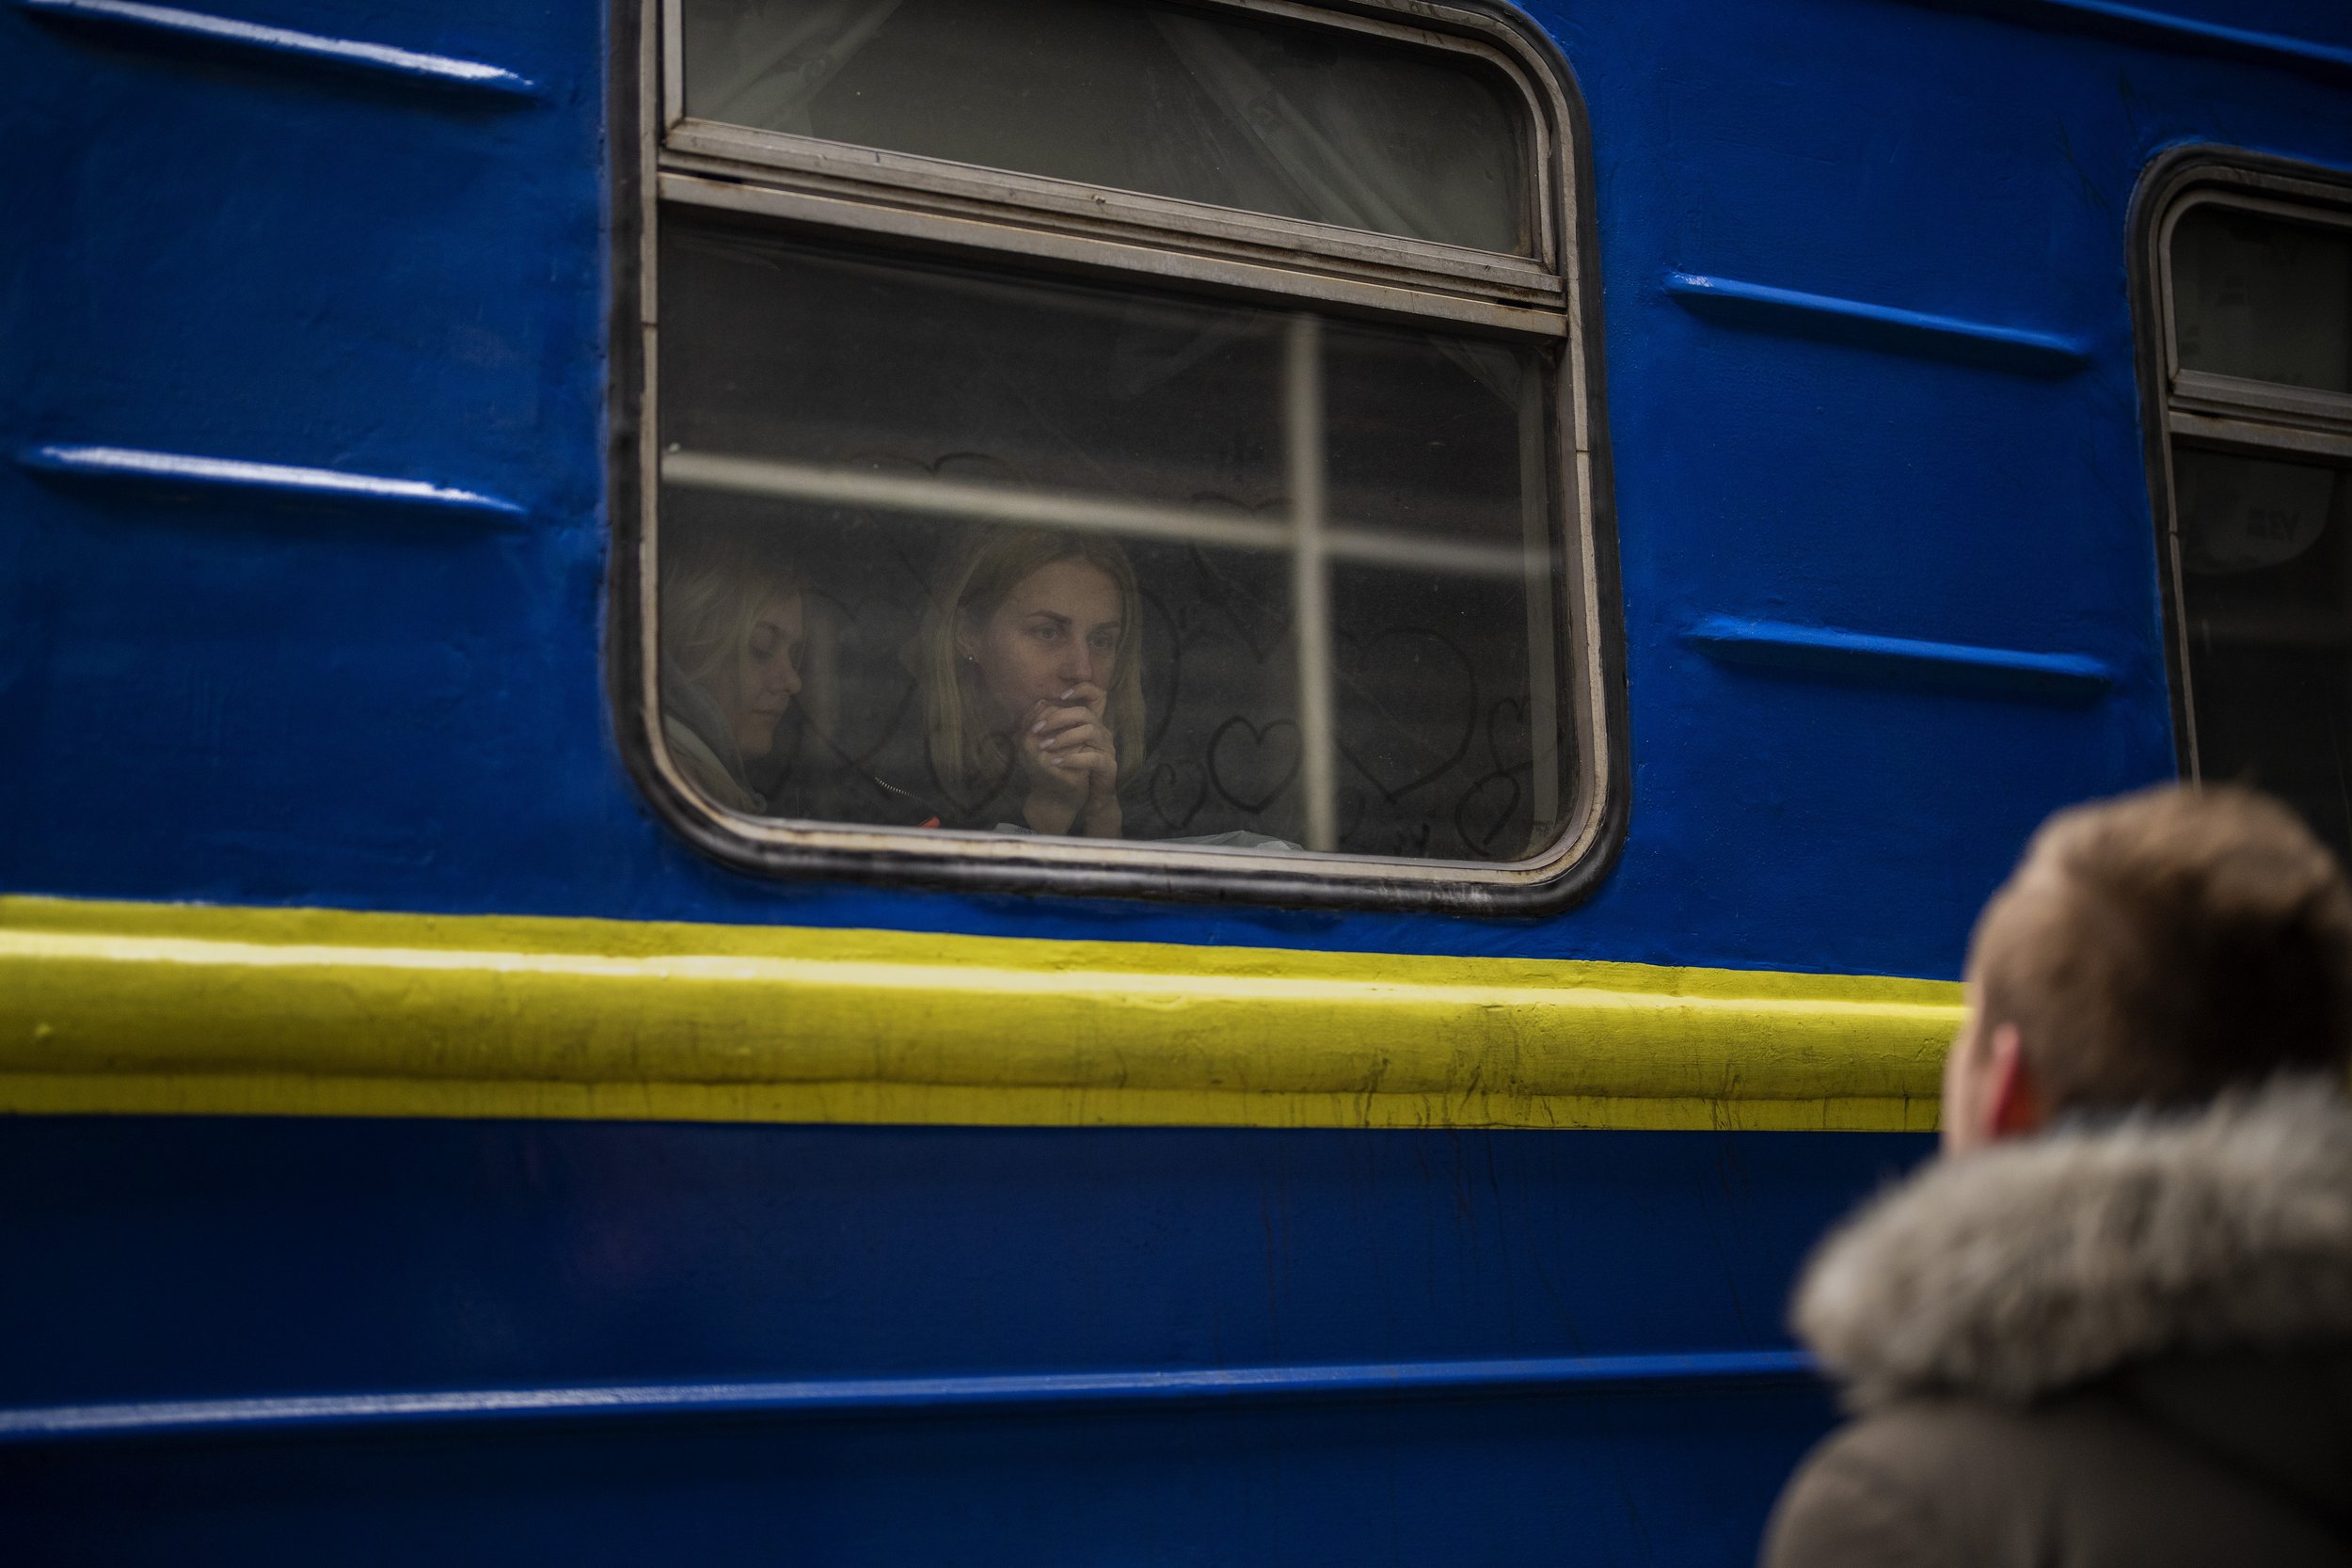  Bogdan, 41, says goodbye to his wife Lena, 35, on a train to Lviv at the Kyiv station, Ukraine, Thursday, March 3. 2022. Bogdan is staying to fight while his family is leaving the country to seek refuge in a neighboring country. (AP Photo/Emilio Mor